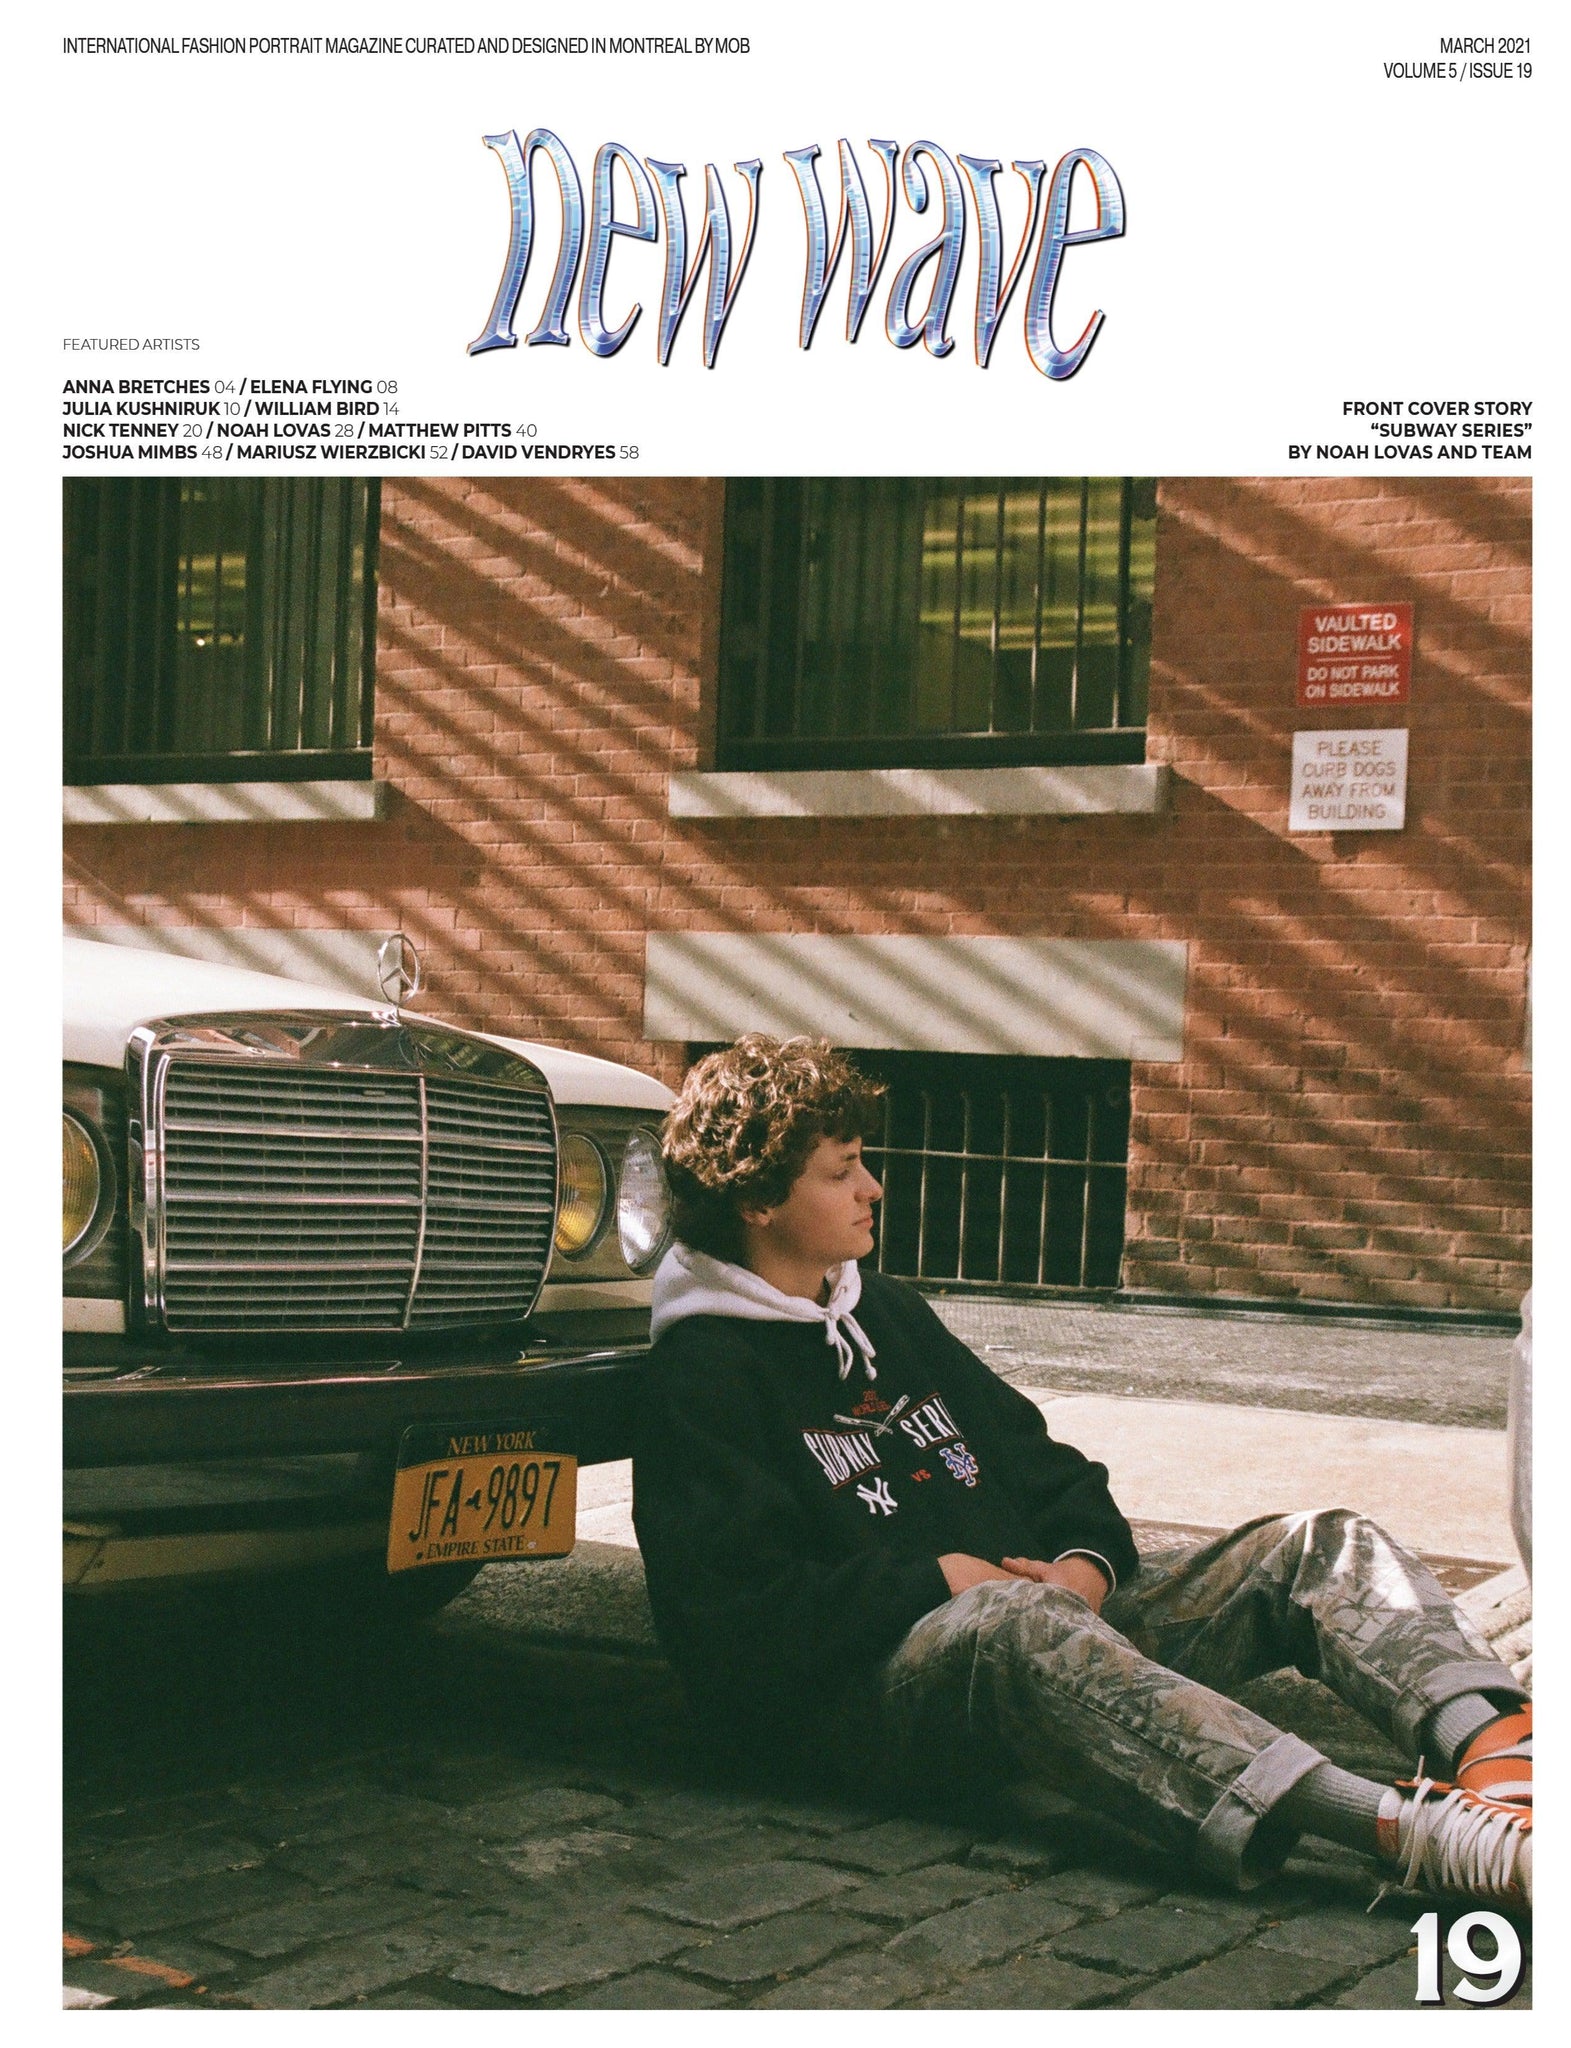 NEW WAVE | VOLUME FIVE | ISSUE #19 - Mob Journal